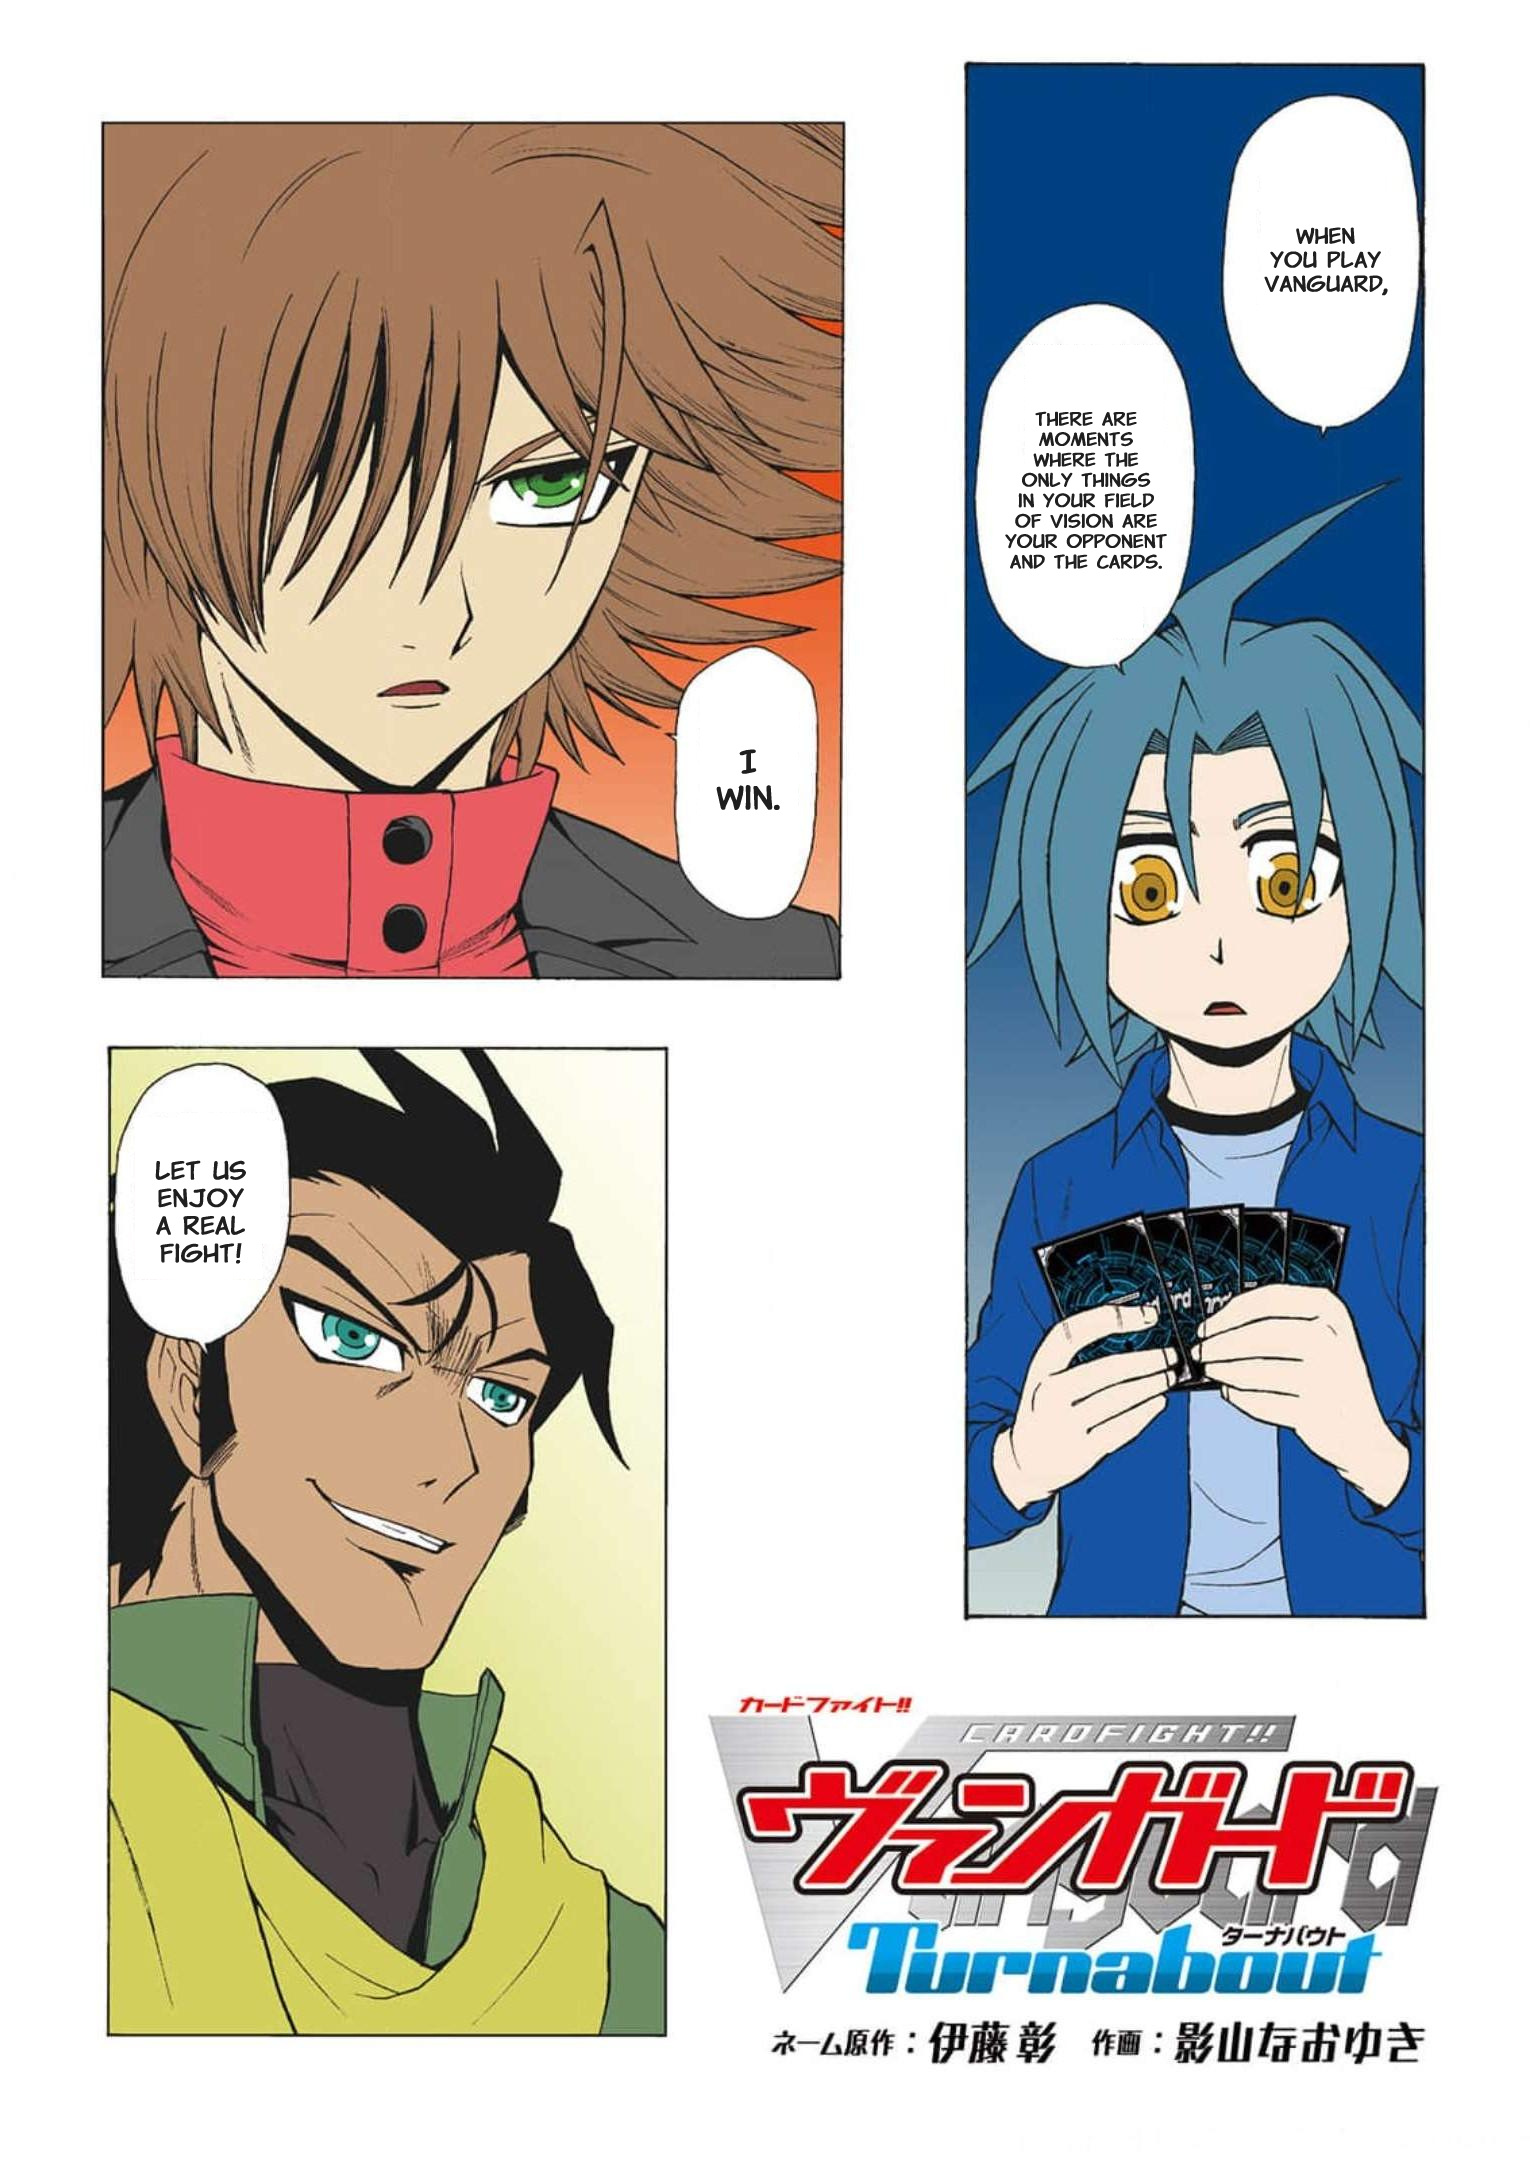 Cardfight!! Vanguard: Turnabout Chapter 8 #2